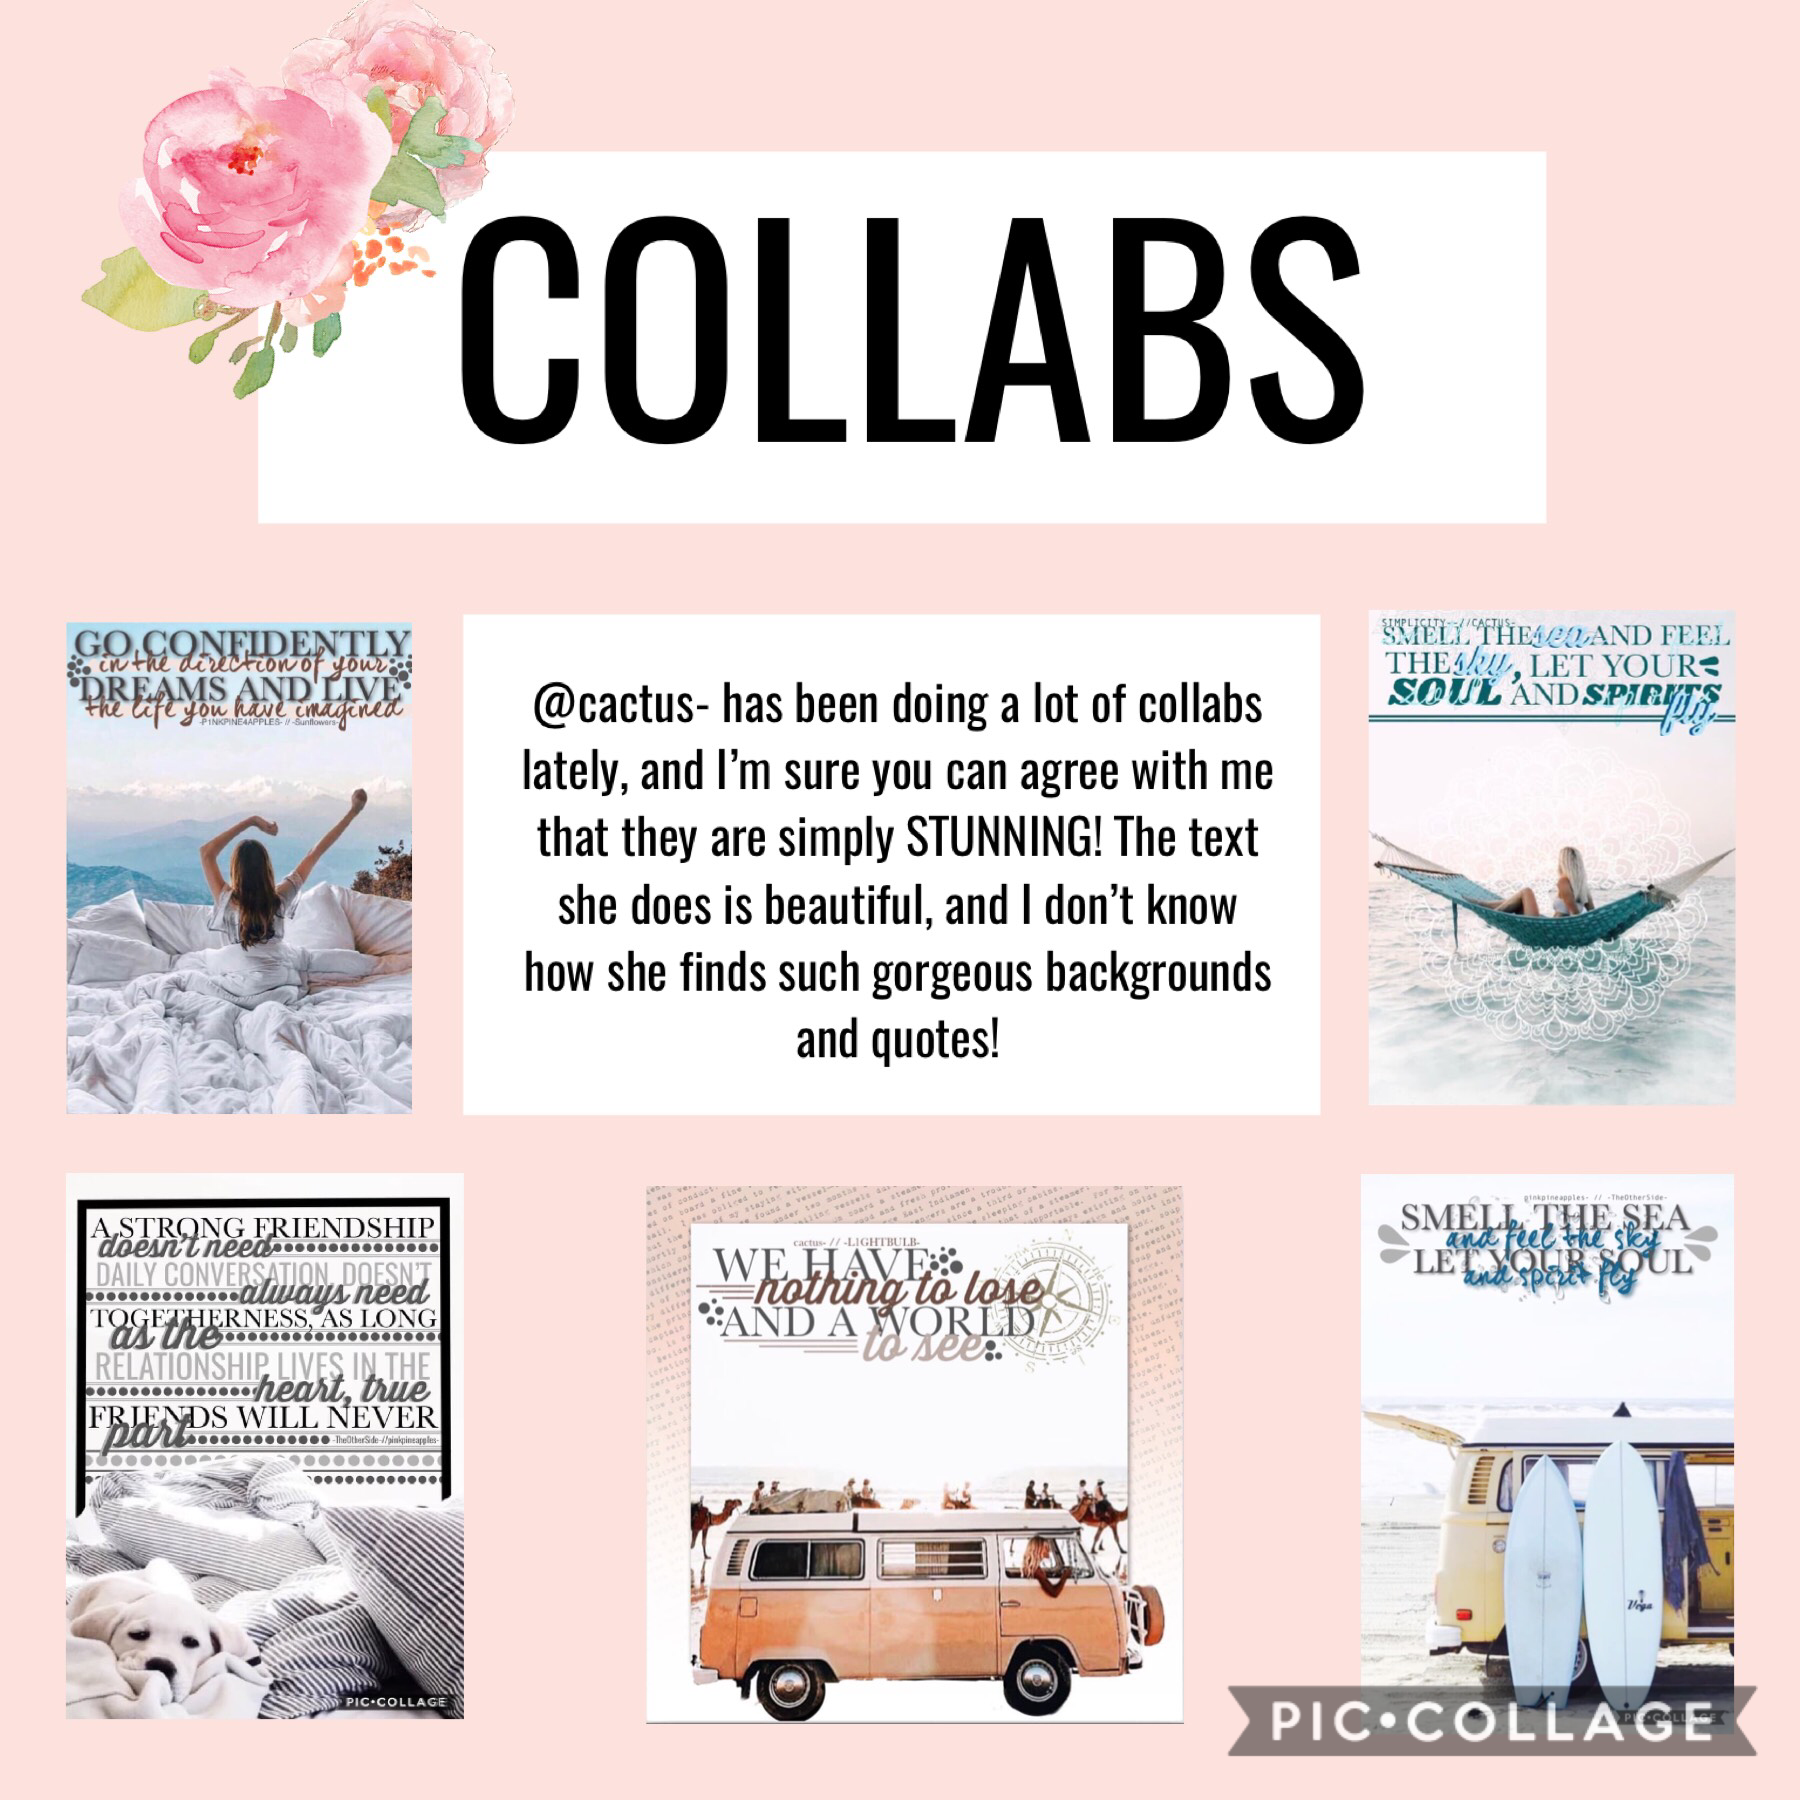 If you haven’t yet, I’d highly recommend collabing with her! If you don’t believe me, take a look at these amazing collages for proof that you should 💕